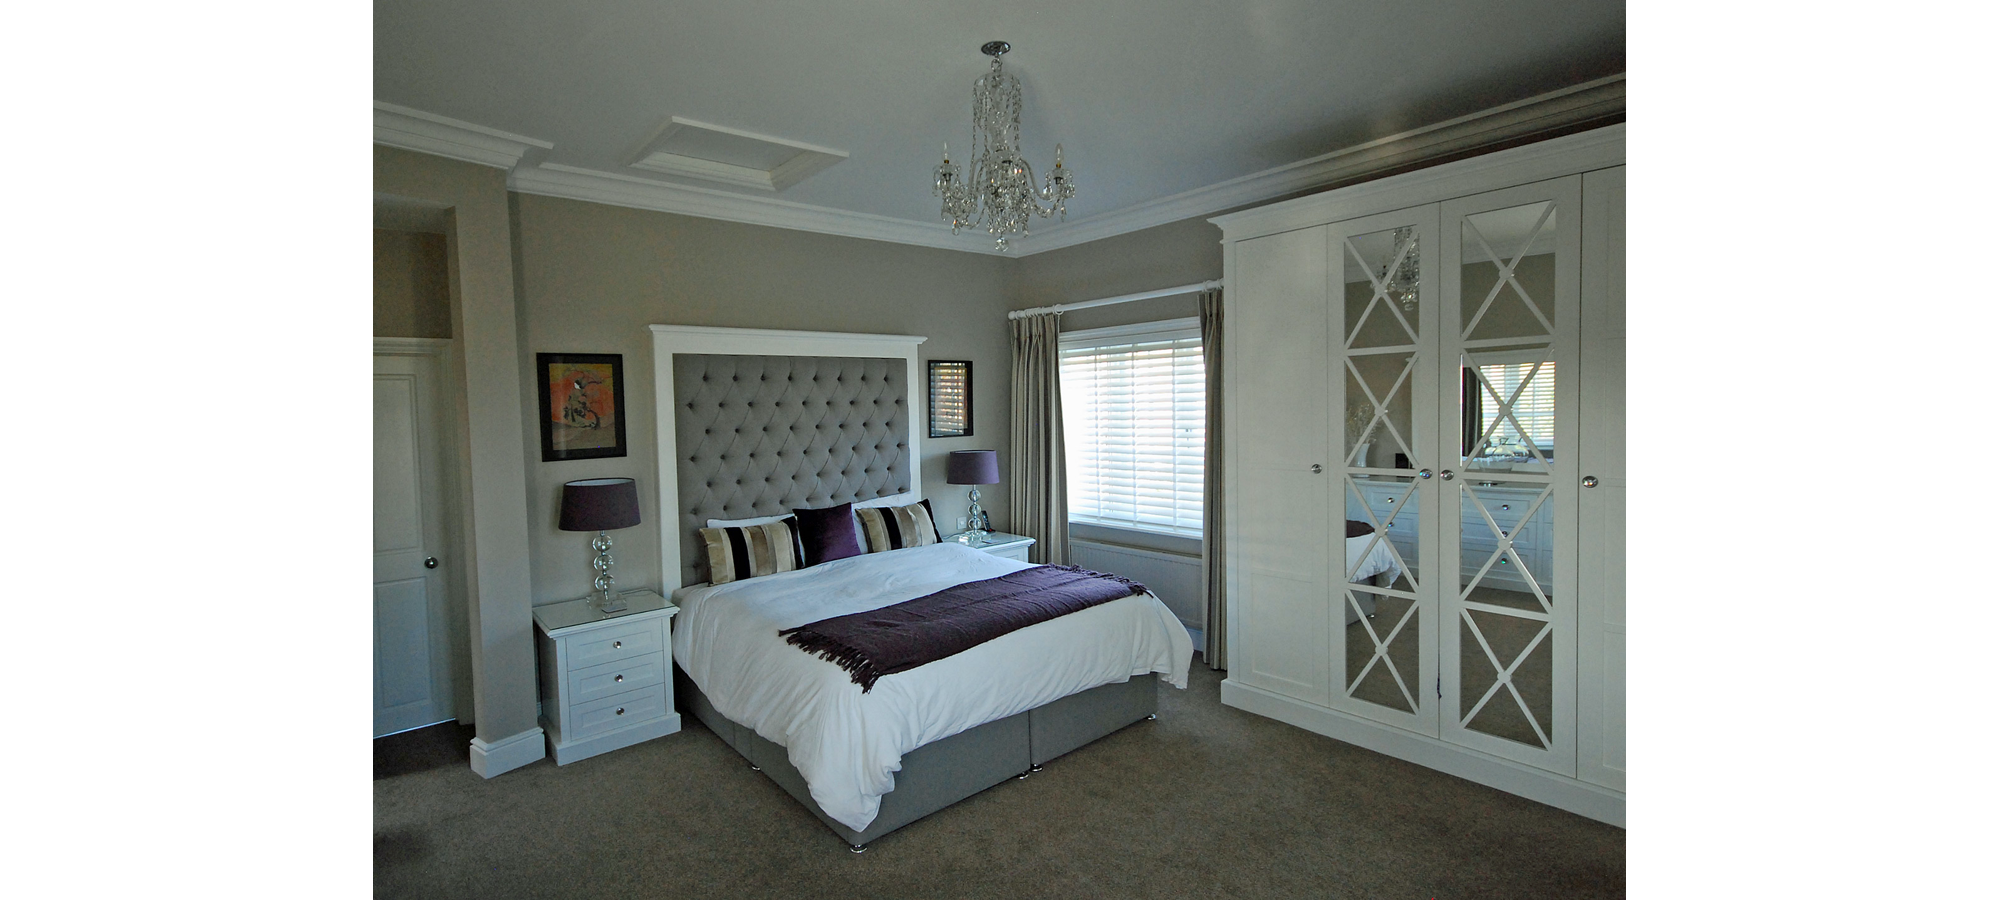 painting ideas for bedroom furniture